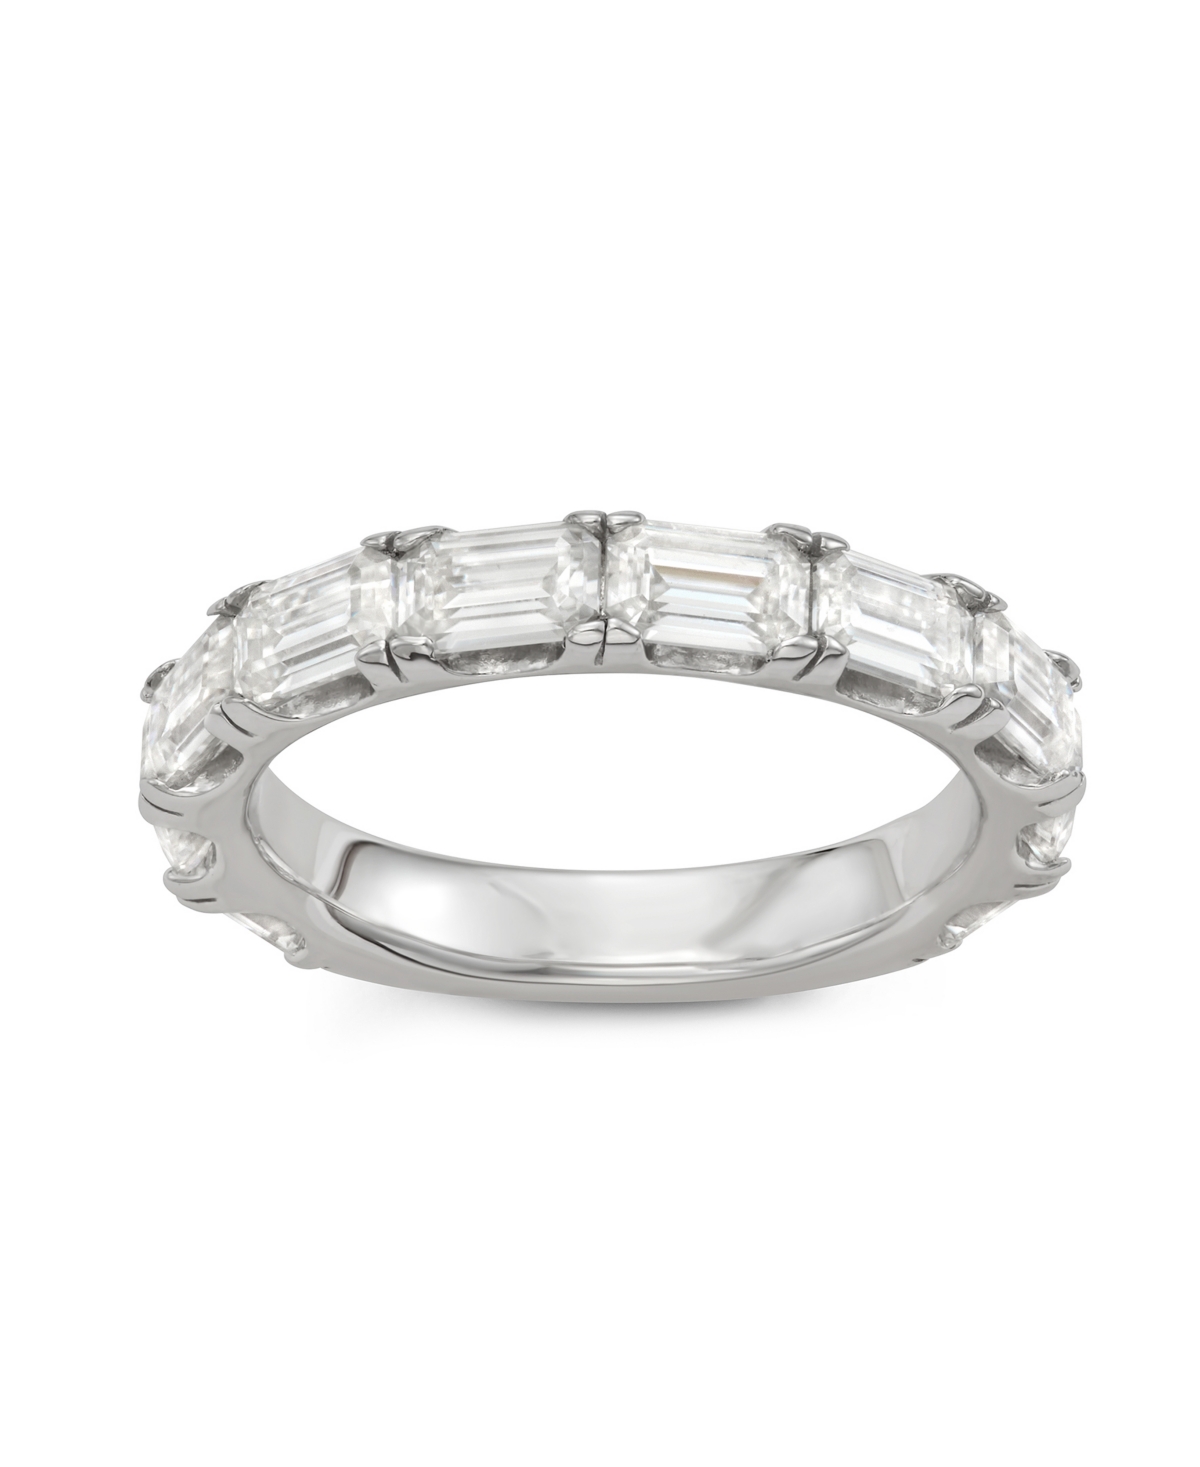 Charles & Colvard Moissanite Emerald Cut Wedding Band (2 3/4 Ct. T.w. Diamond Equivalent) In Sterling Silver